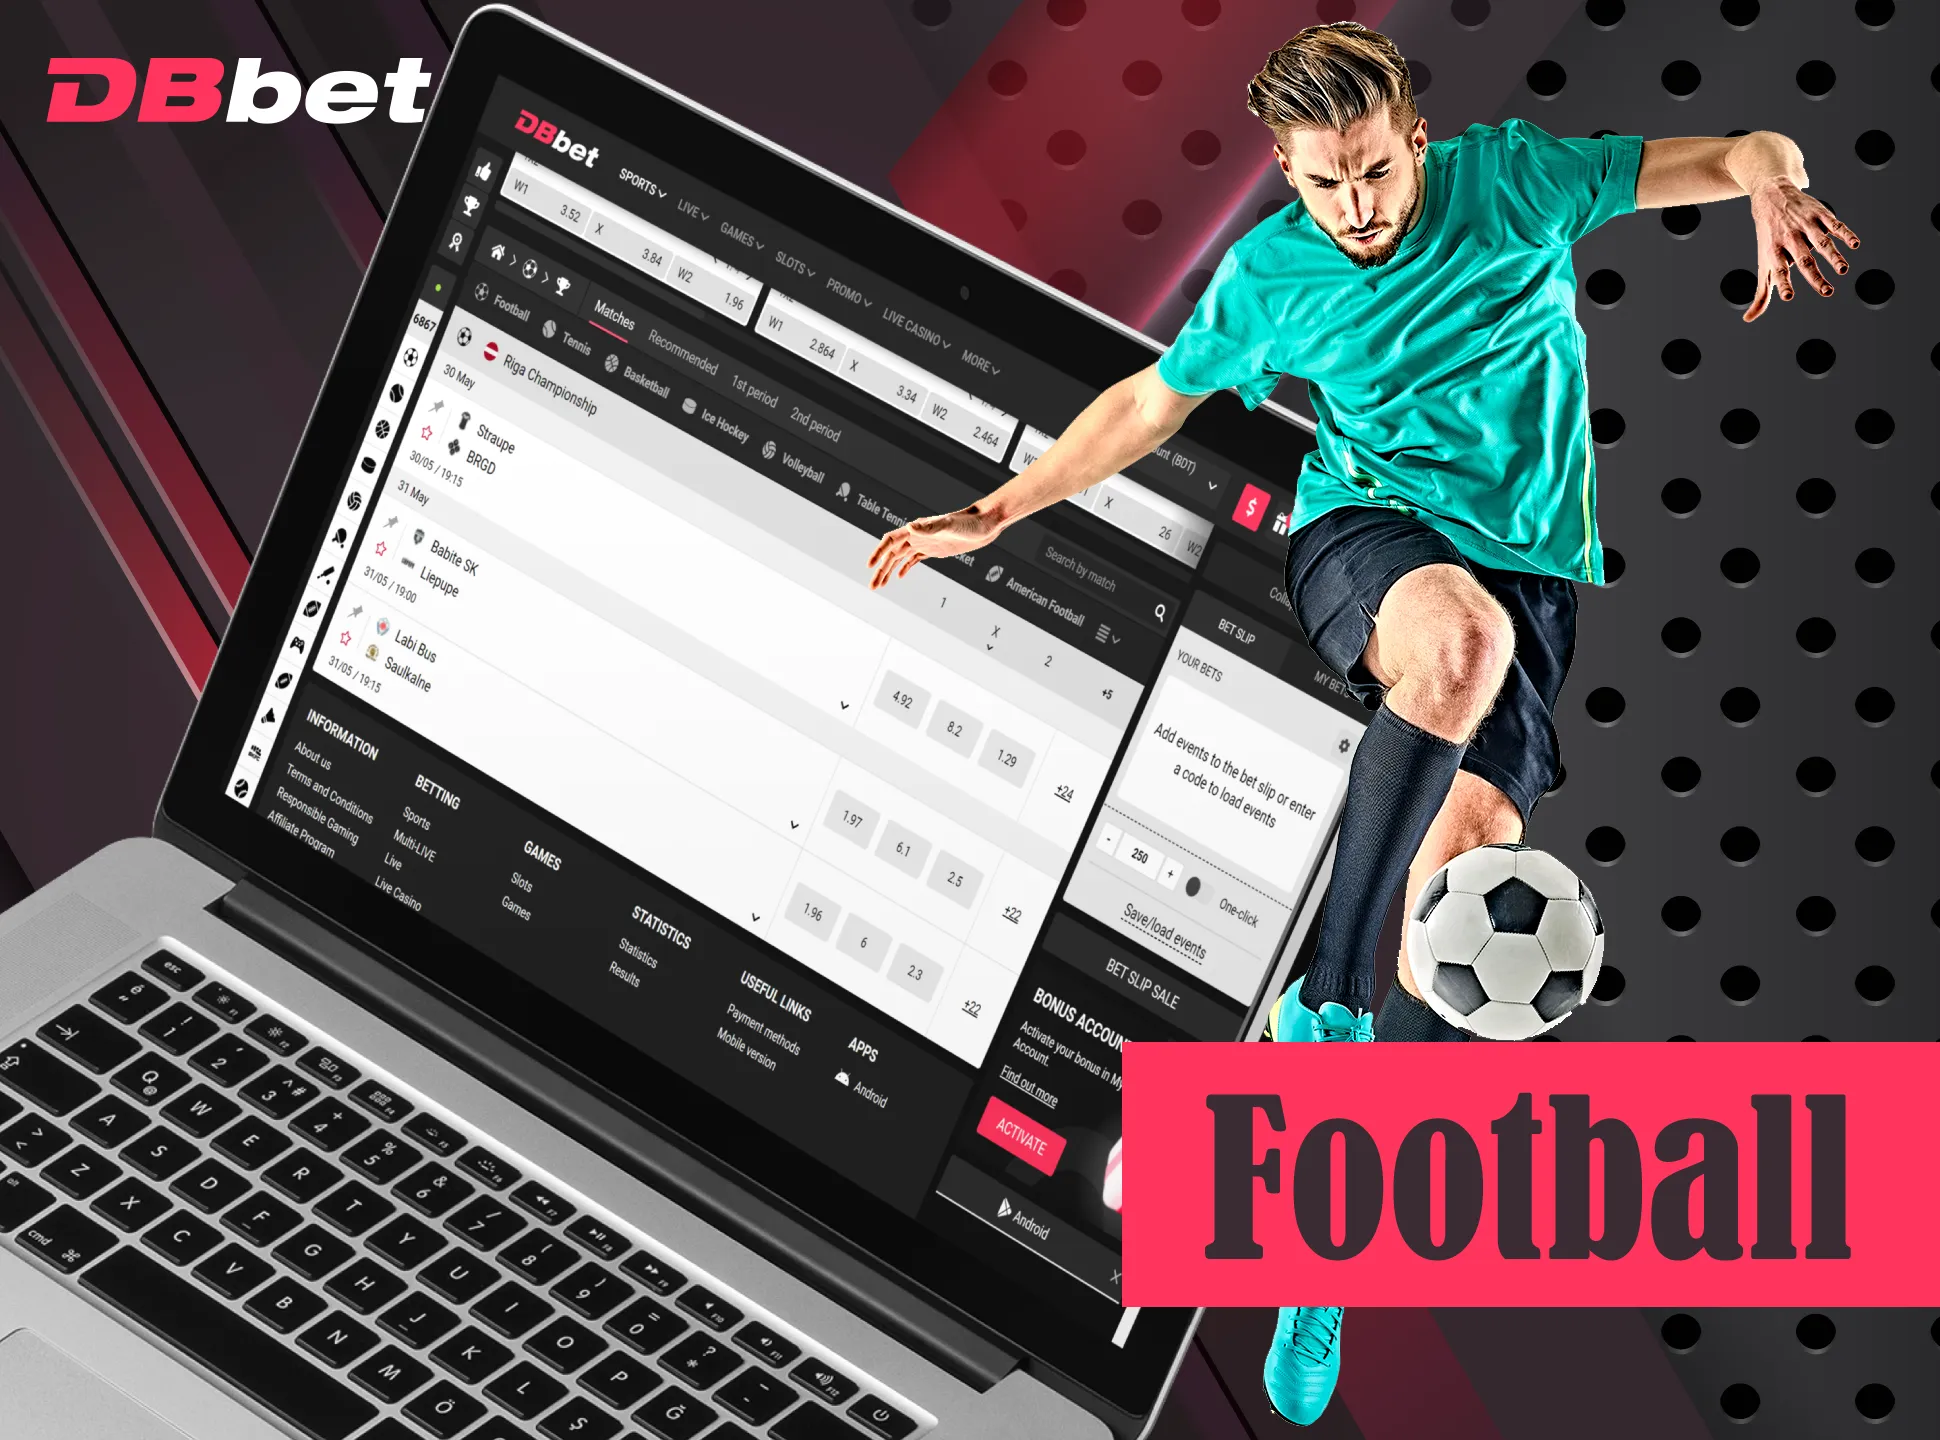 DBbet is a great place for making bets on football.